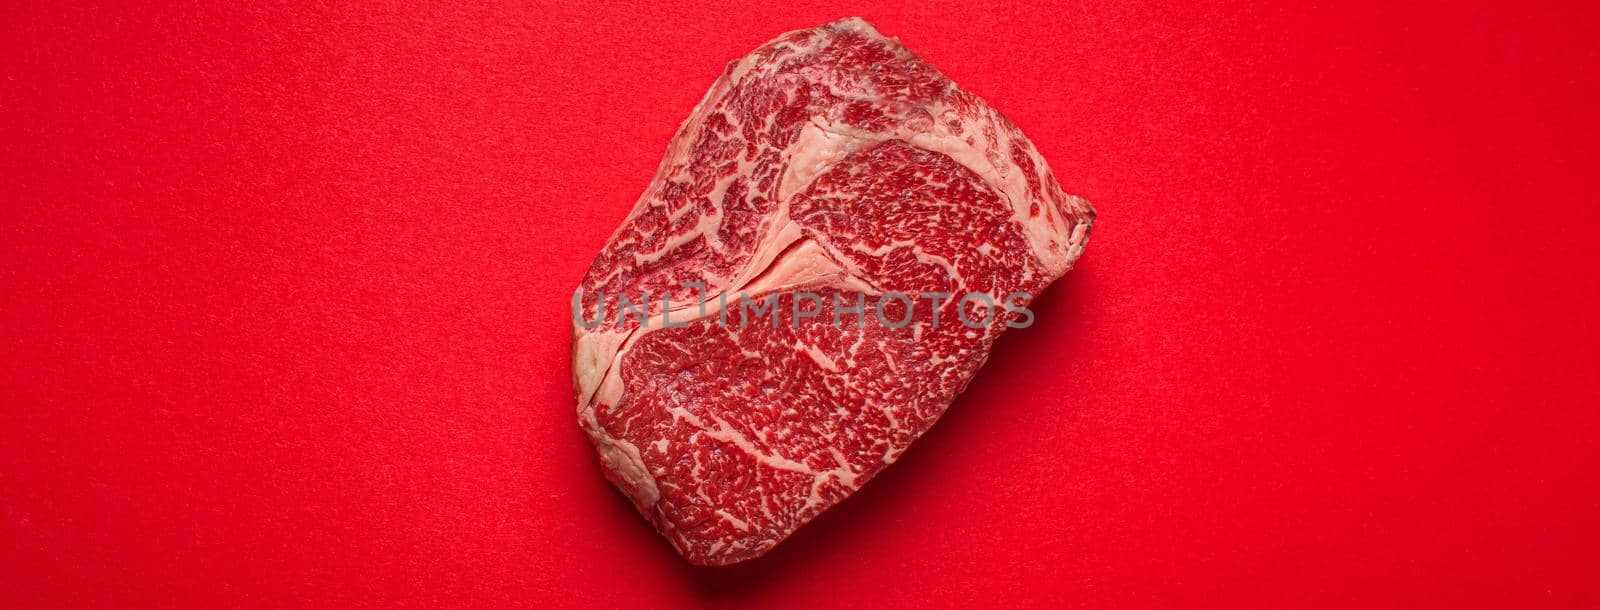 Raw meat beef prime cut steak Ribeye on clean red background from above, beefsteak concept banner minimalism by its_al_dente